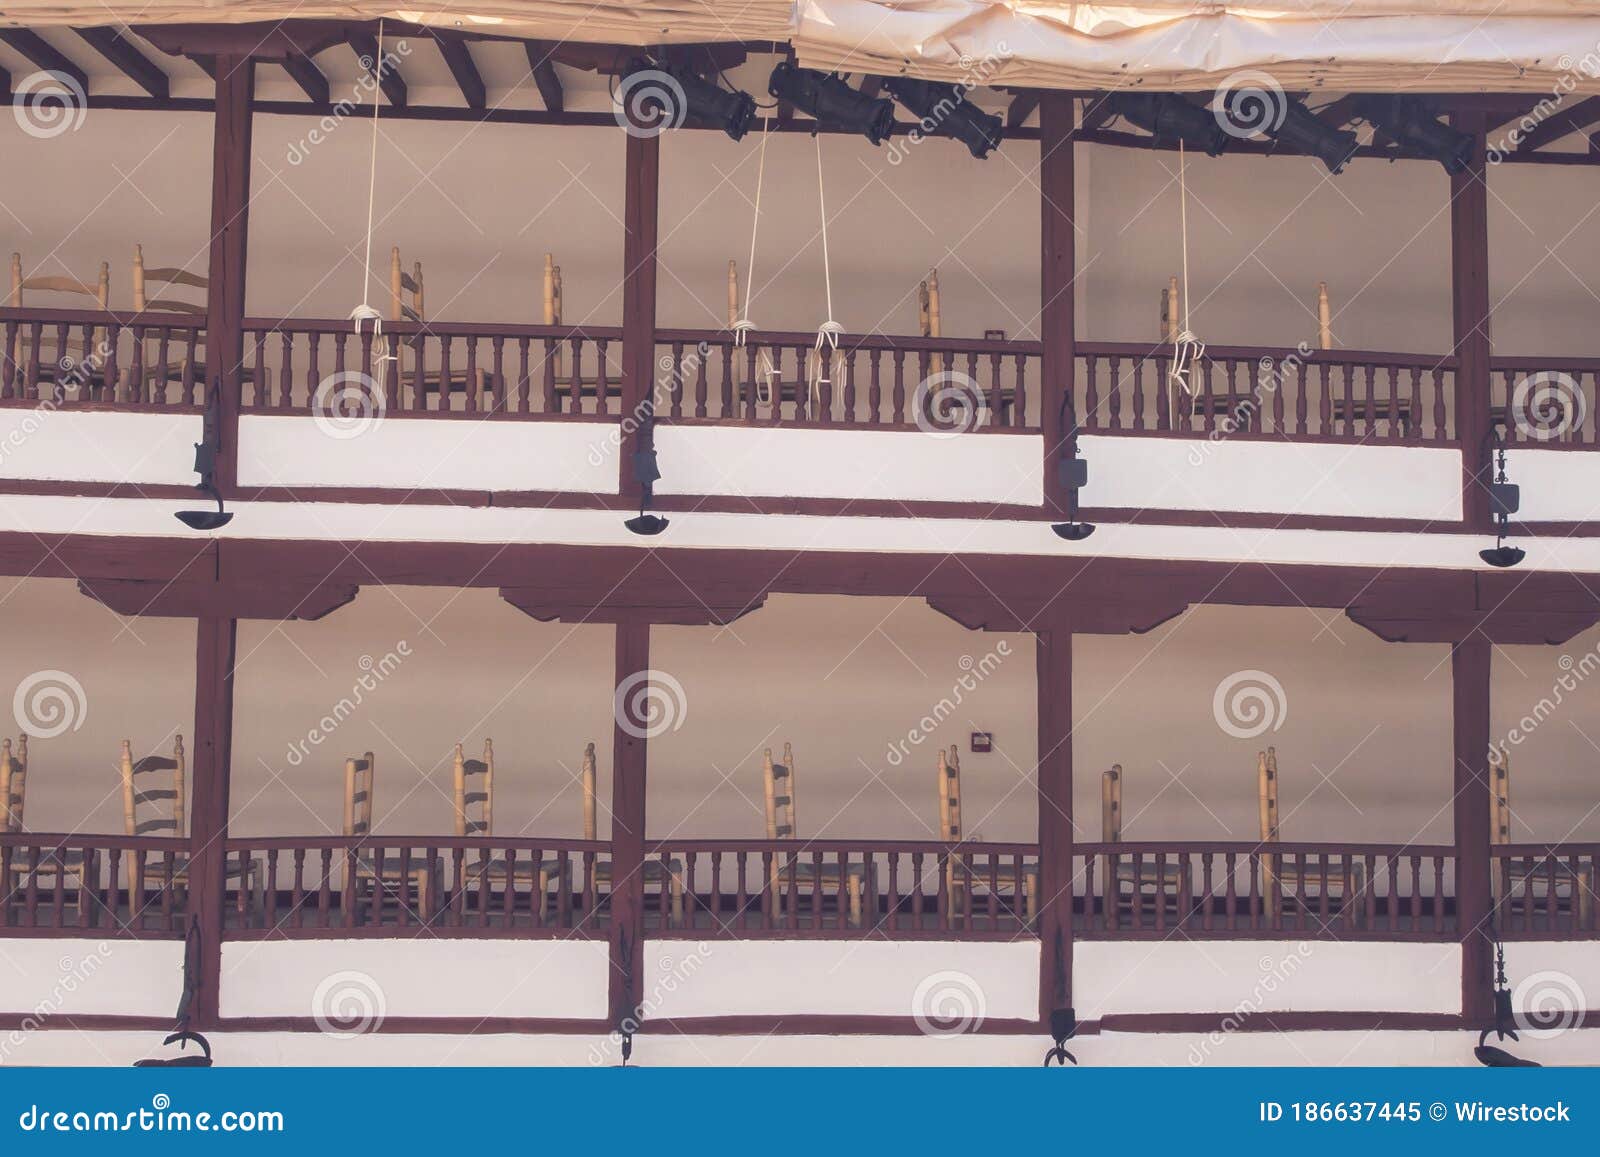 balconies with wooden chairs in corral de comedias ancient theater captured in almagro, spain